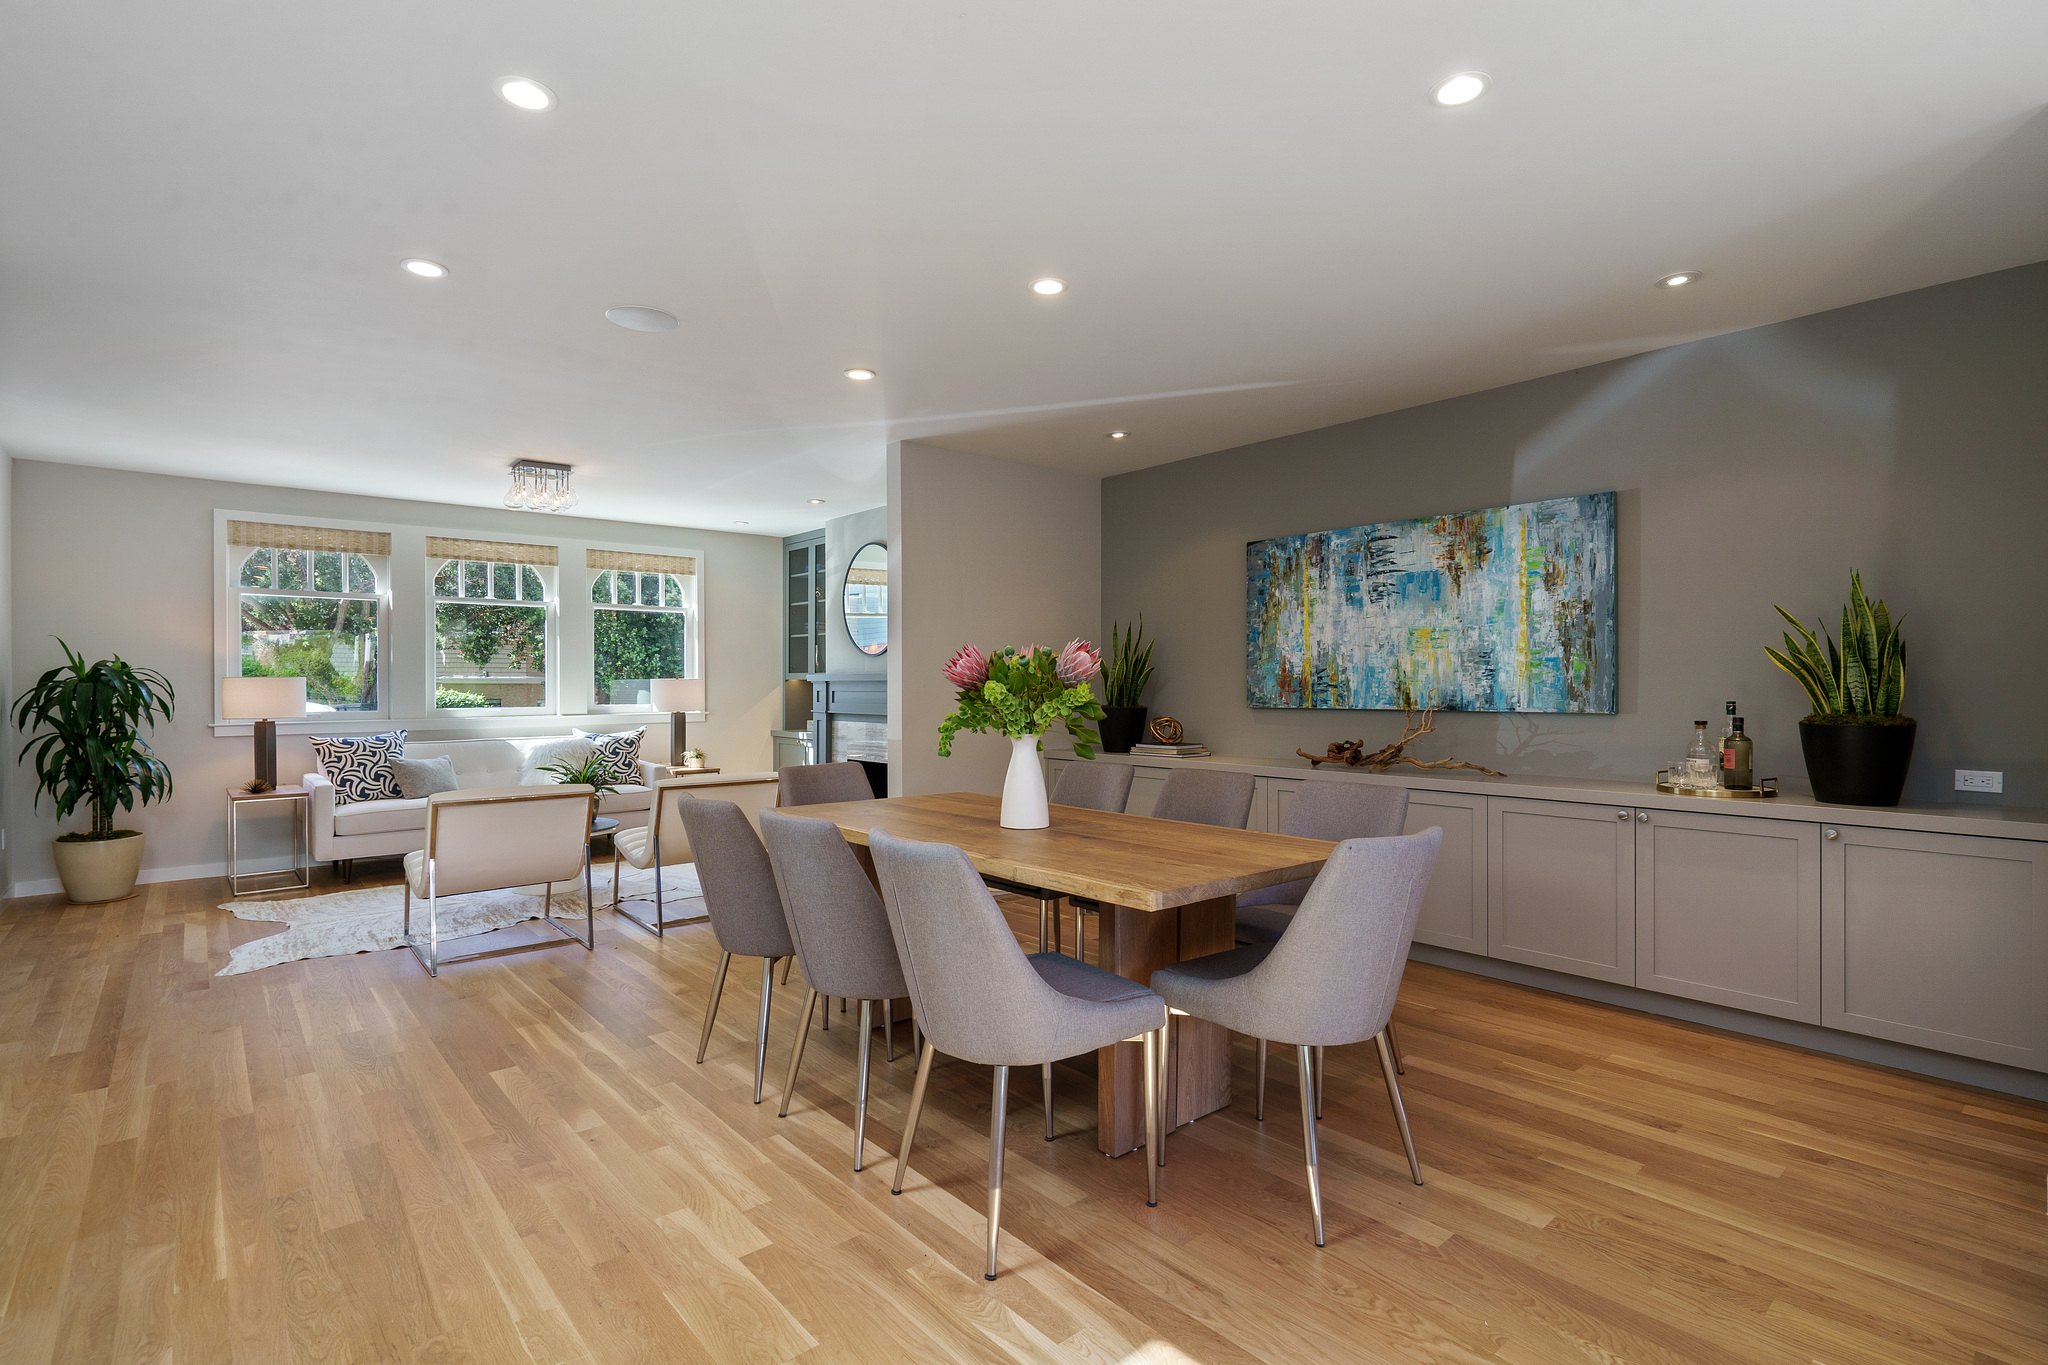 Property Photo: Open floor plan view of the dining area